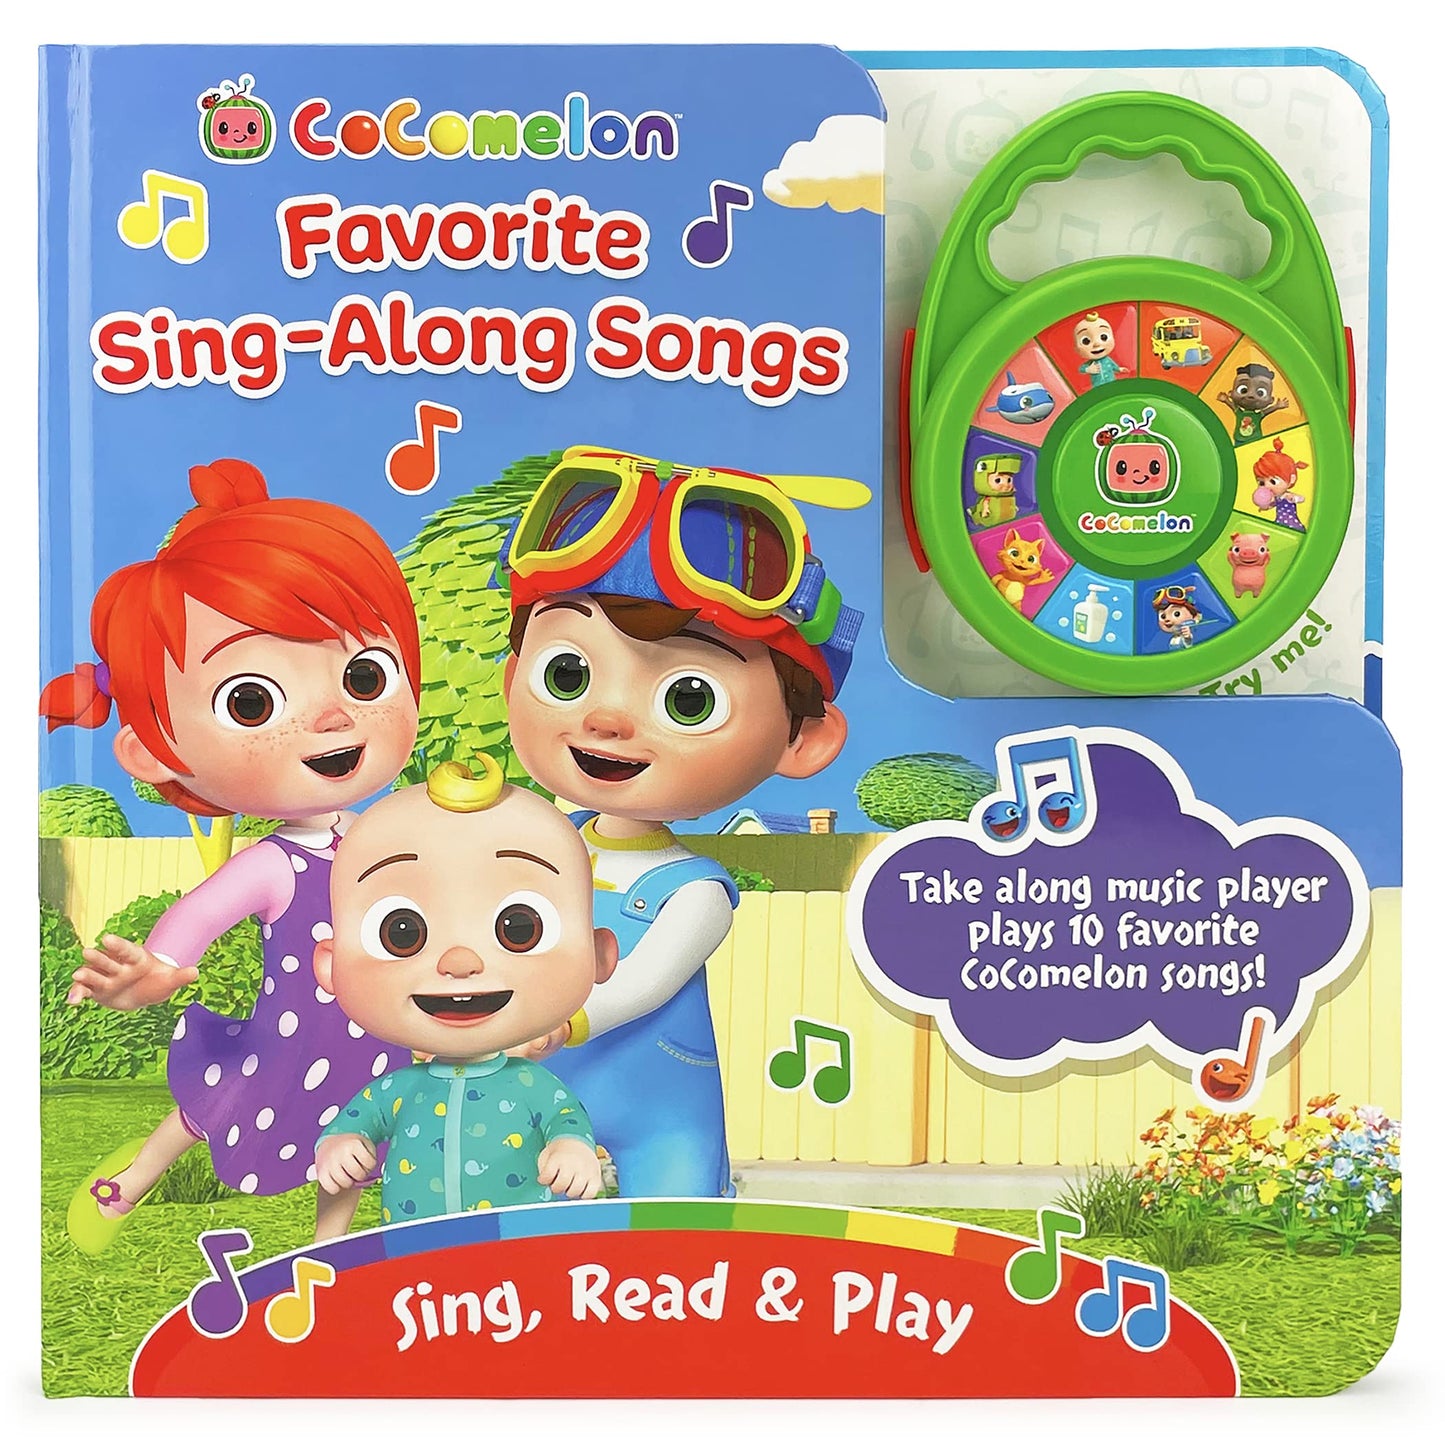 Cocomelon: Favorite Sing-Along Songs